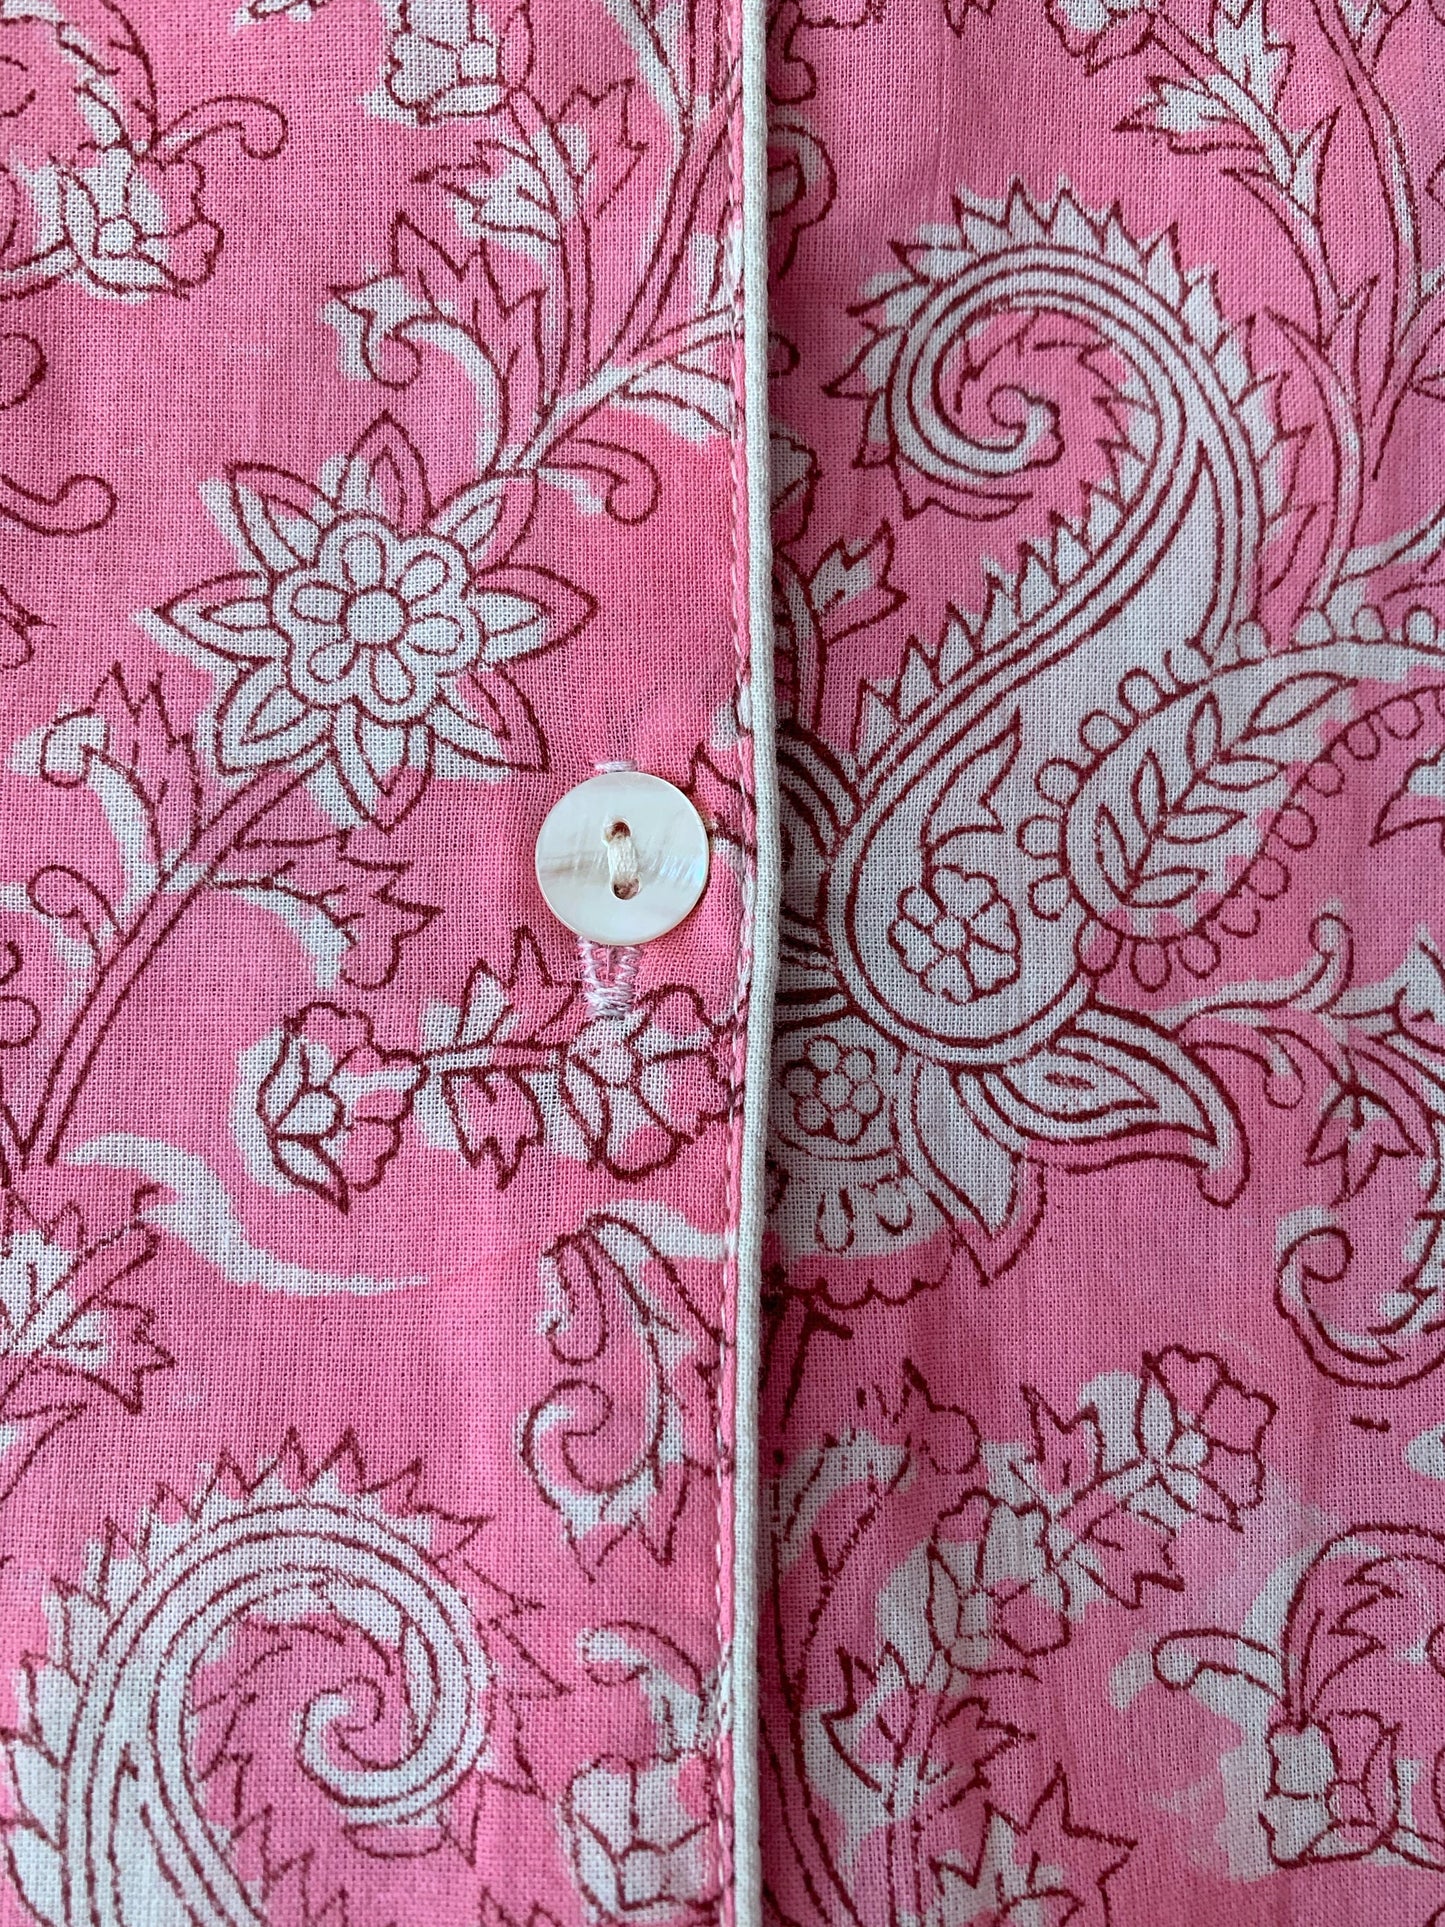 Pajamas with long sleeves and pants · Pure cotton block print handmade in India · 100% cotton winter pajamas · Pink white cashmere